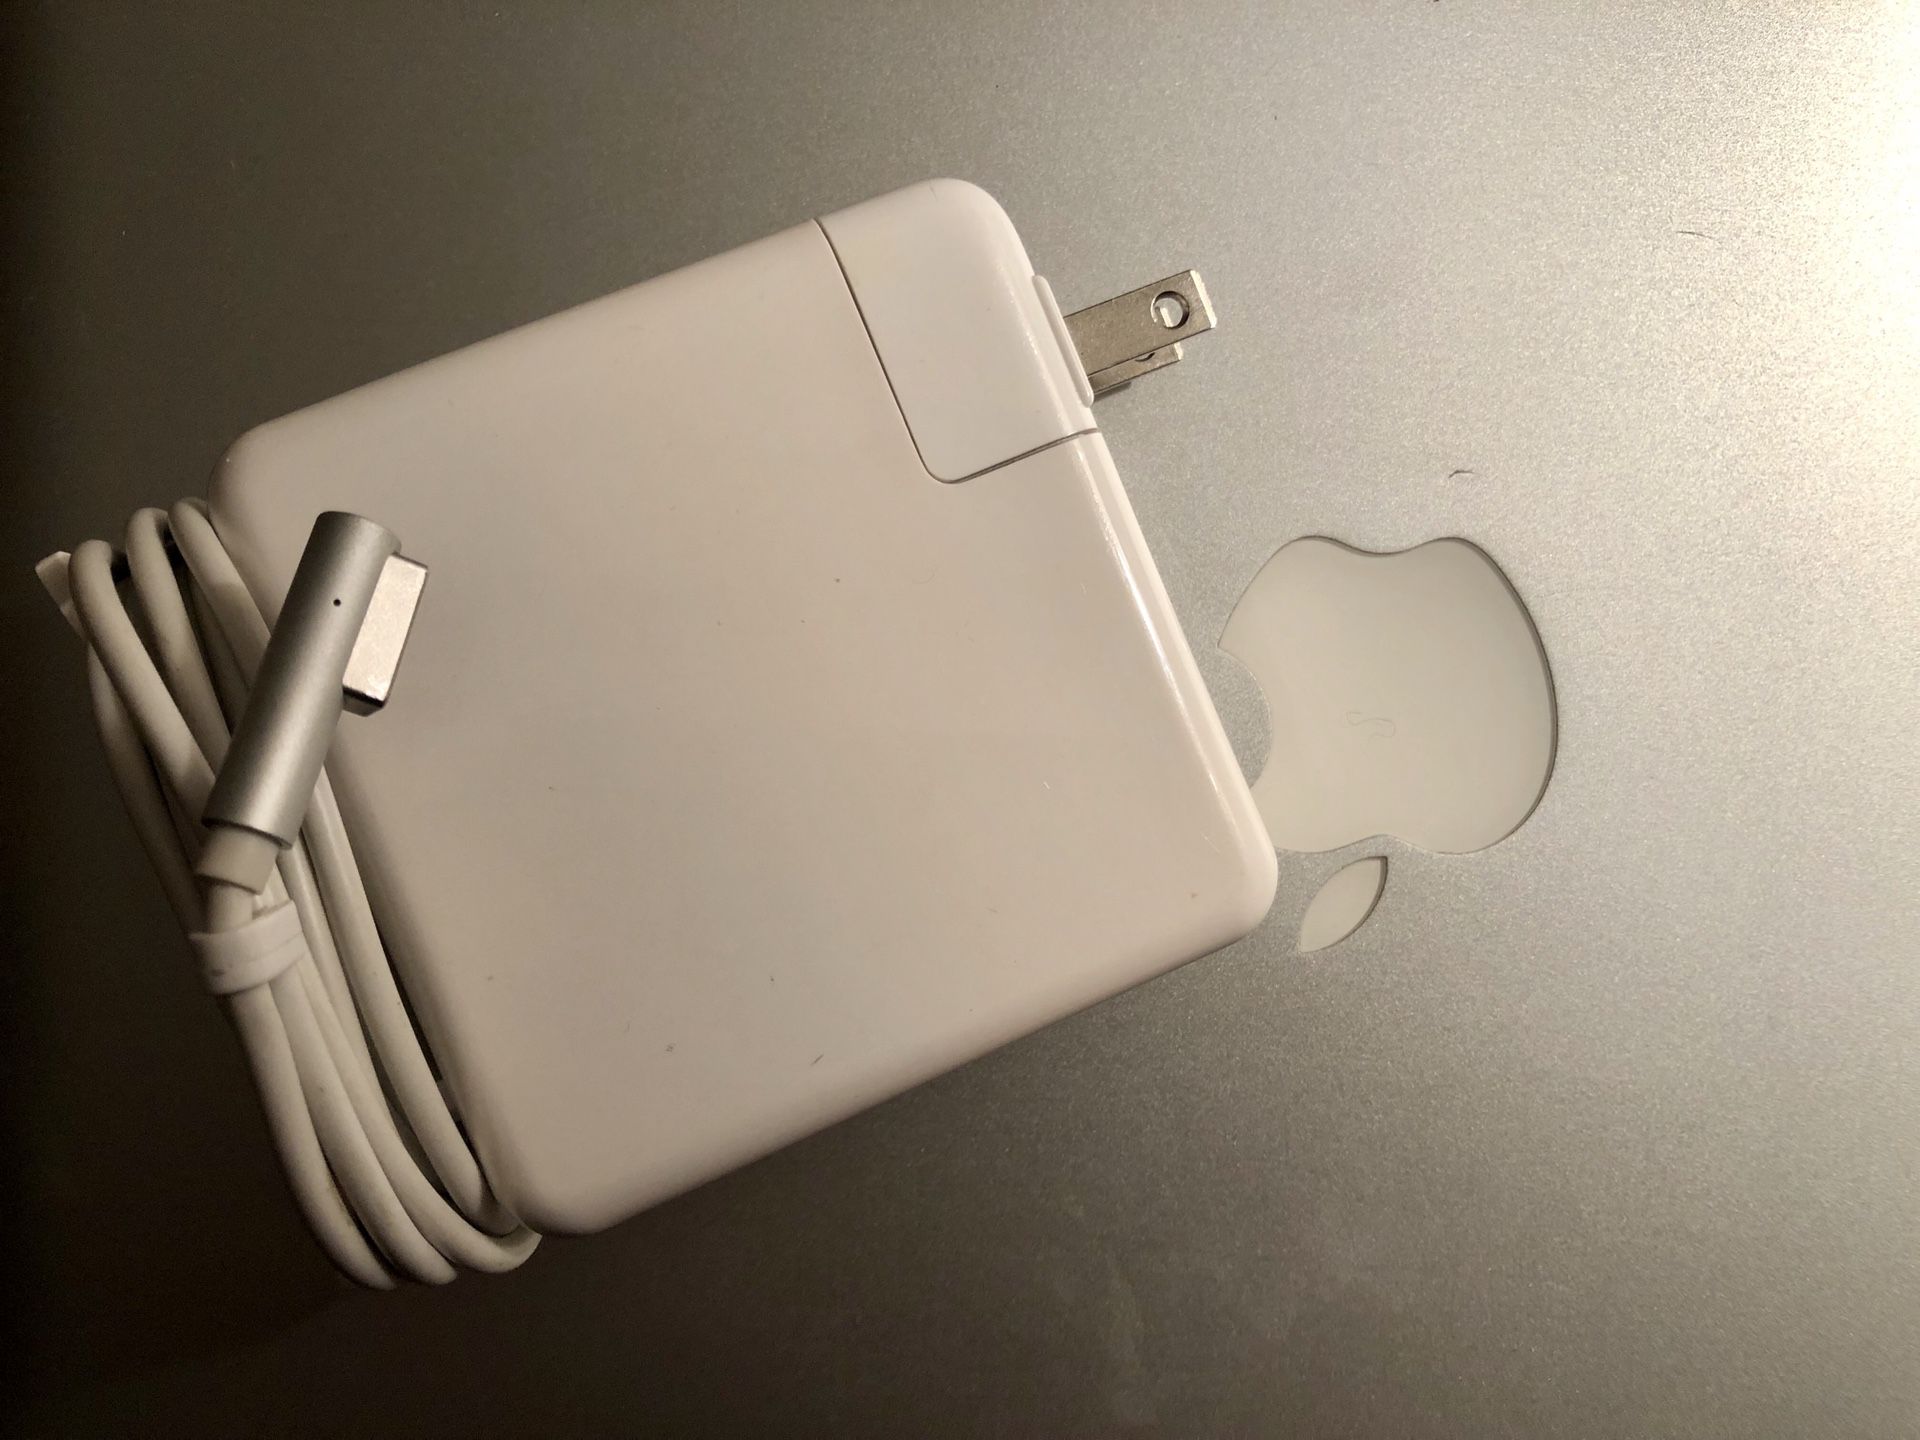 Apple Mac Book Pro Charger